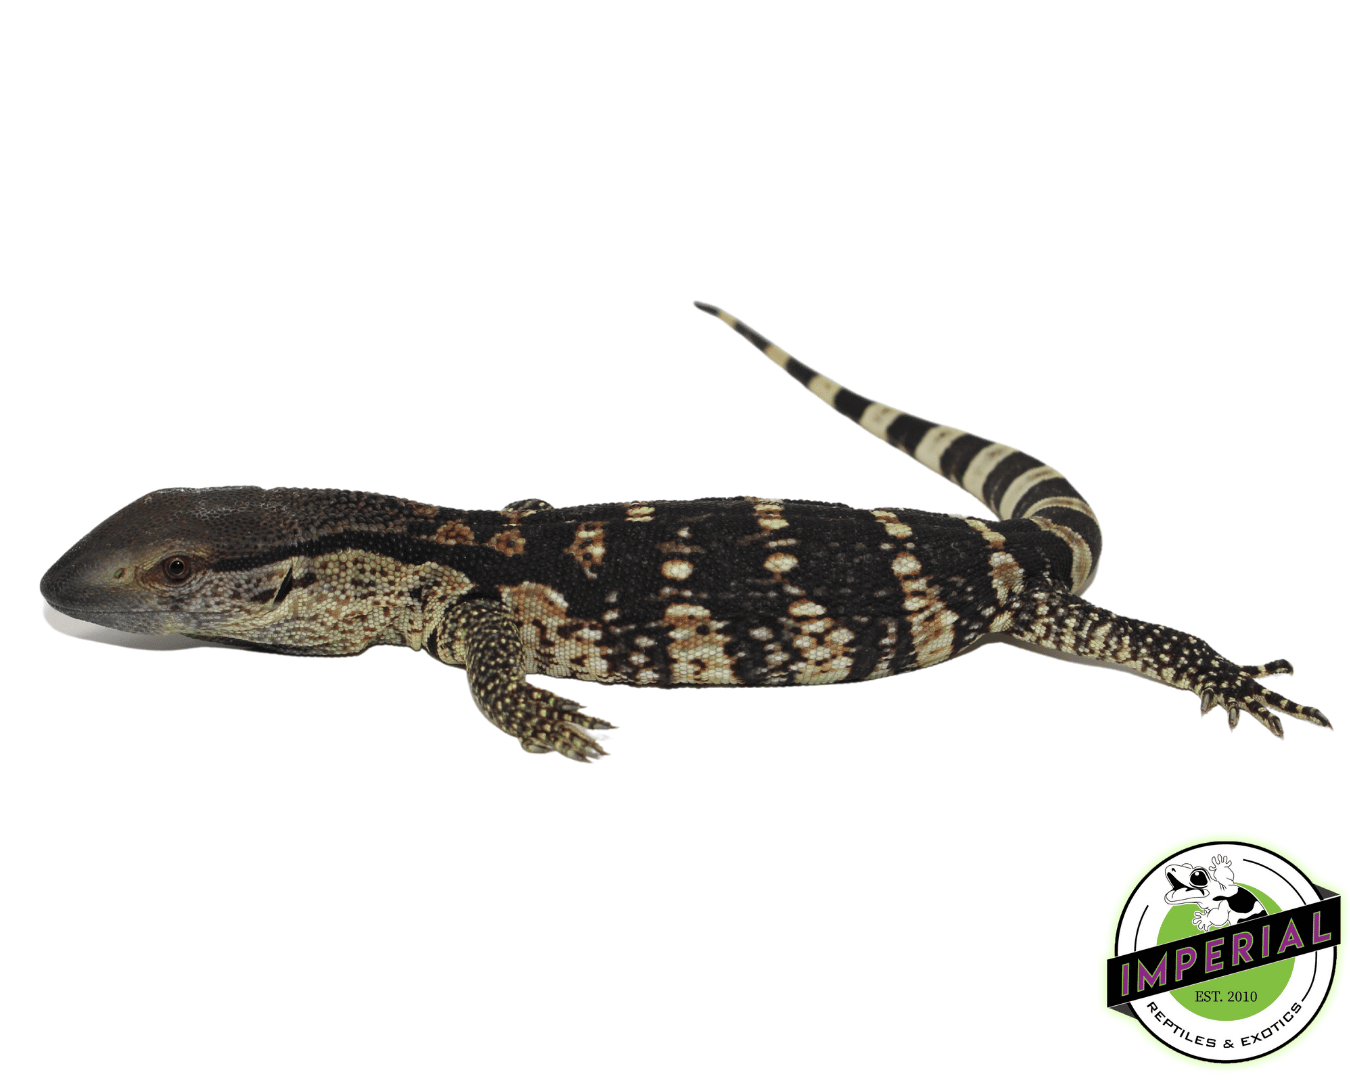 white throat monitor for sale, buy monitor lizard reptiles for sale online at cheap prices